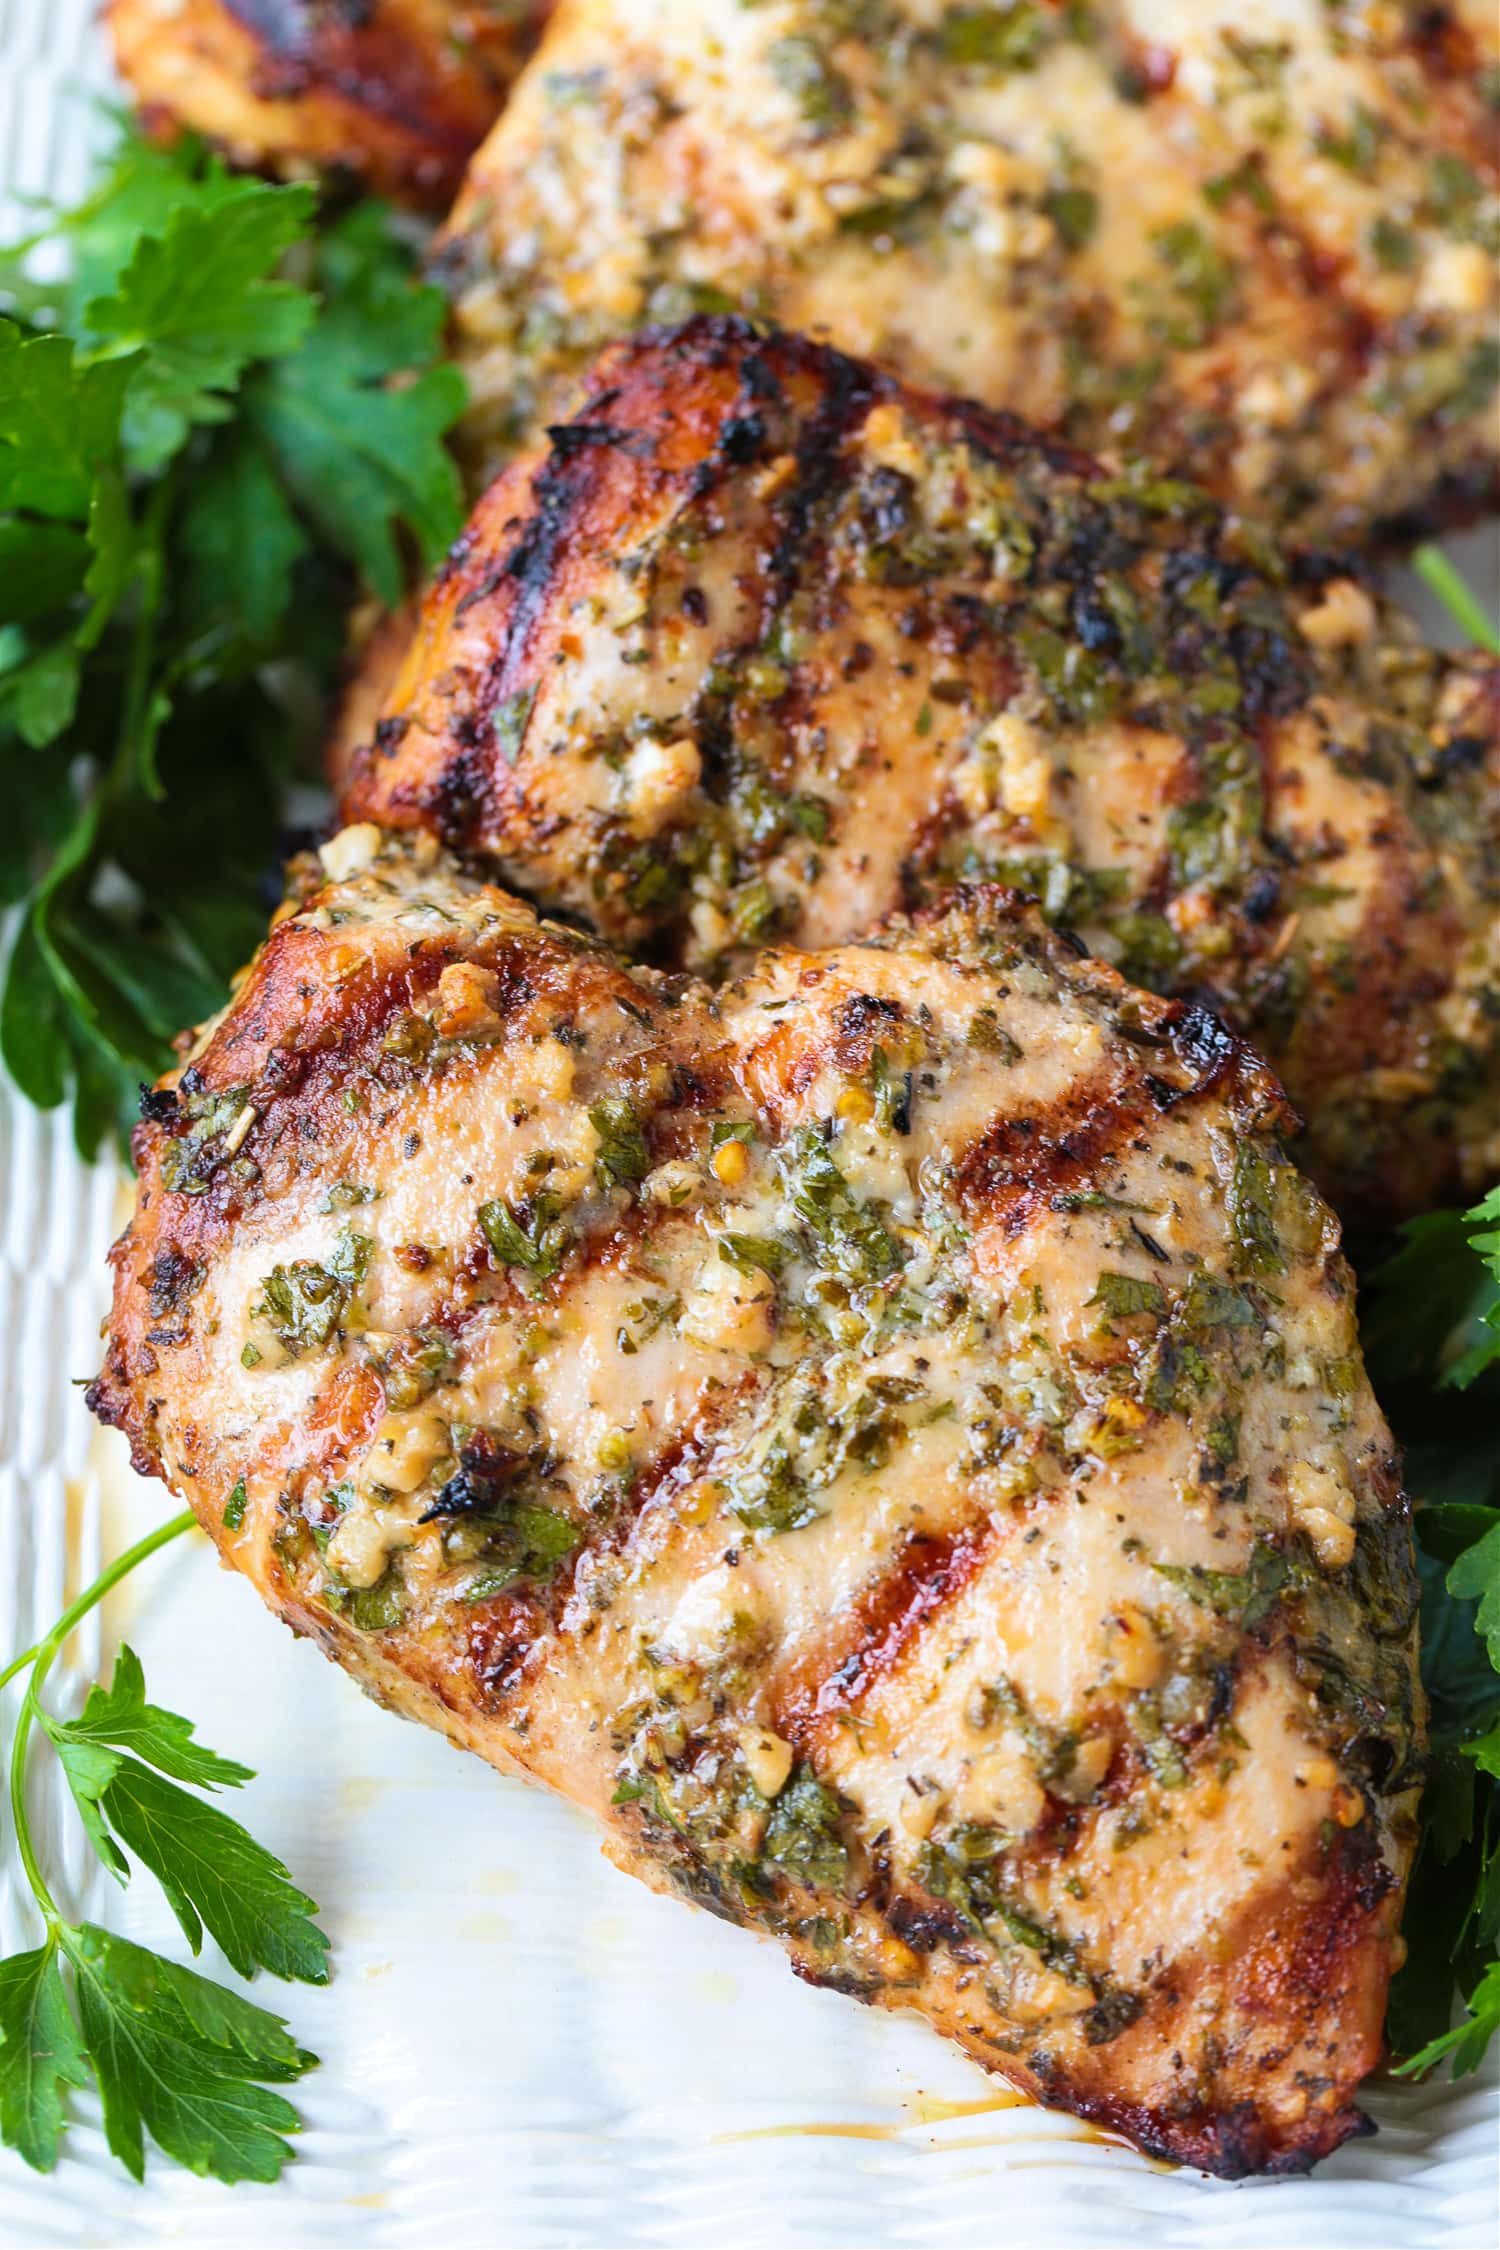 Marinated, grilled chicken breasts on a platter